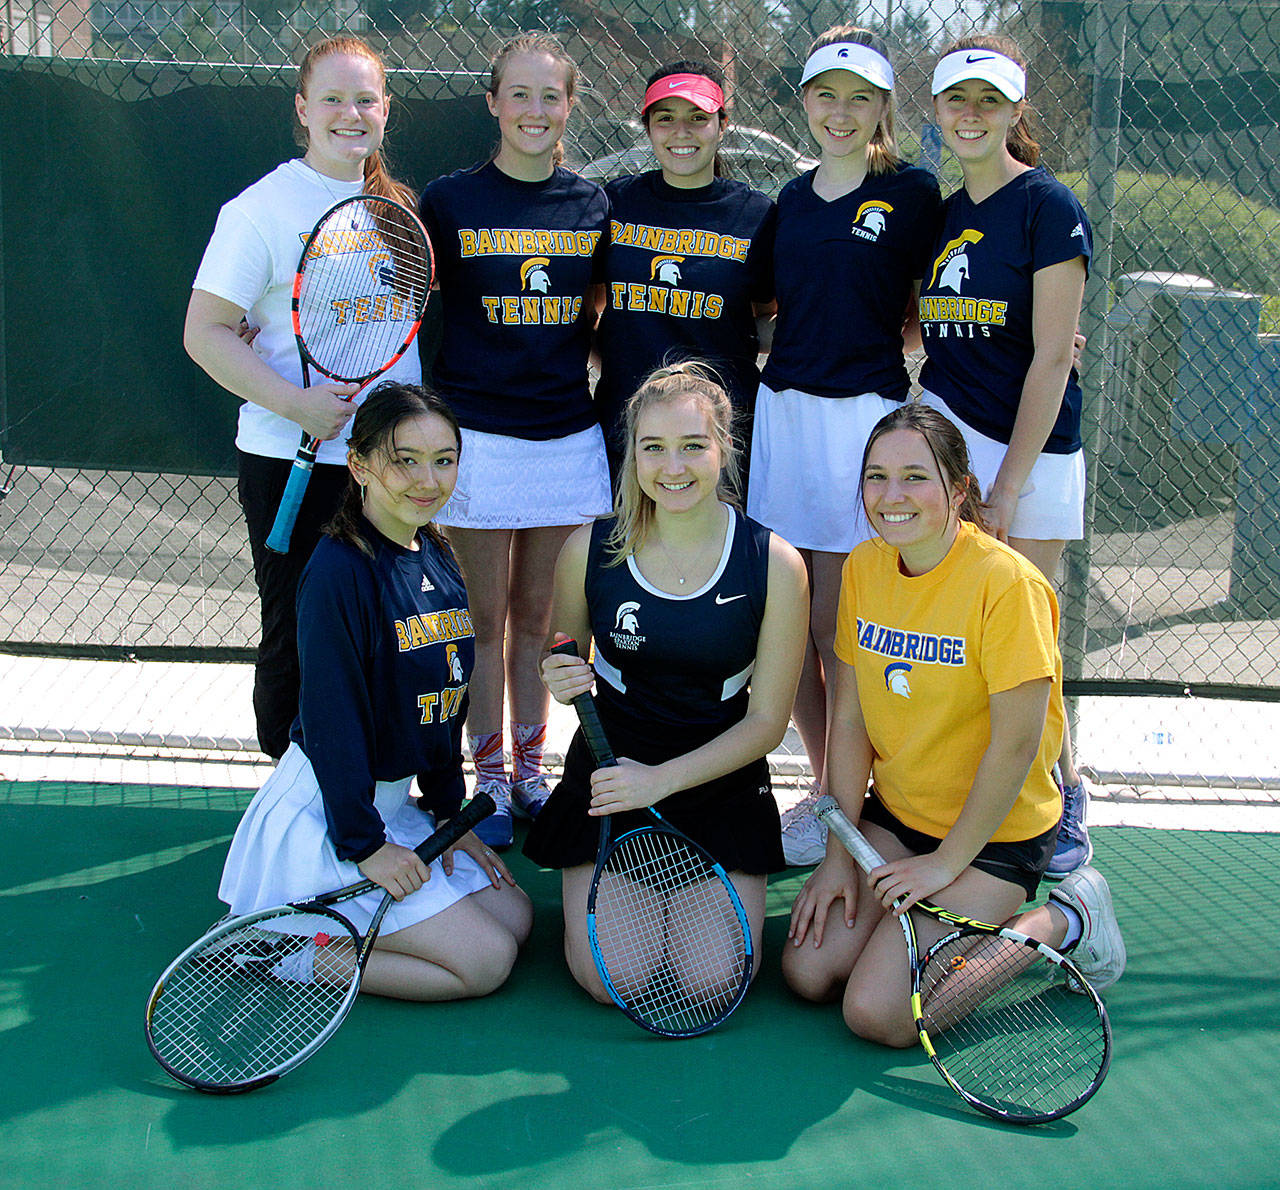 The Bainbridge Spartans girls varsity tennis team gathers for a group photo before the start of the Metro tournament. In front are Jessica Pecunies, Madison Culp and Lina Klinkenberg; and in back, Marianne Milander, Matty Dunham, Jillian Abullarade, Lindsay Payne and Catherine Rolfes. (Brian Kelly | Bainbridge Island Review)